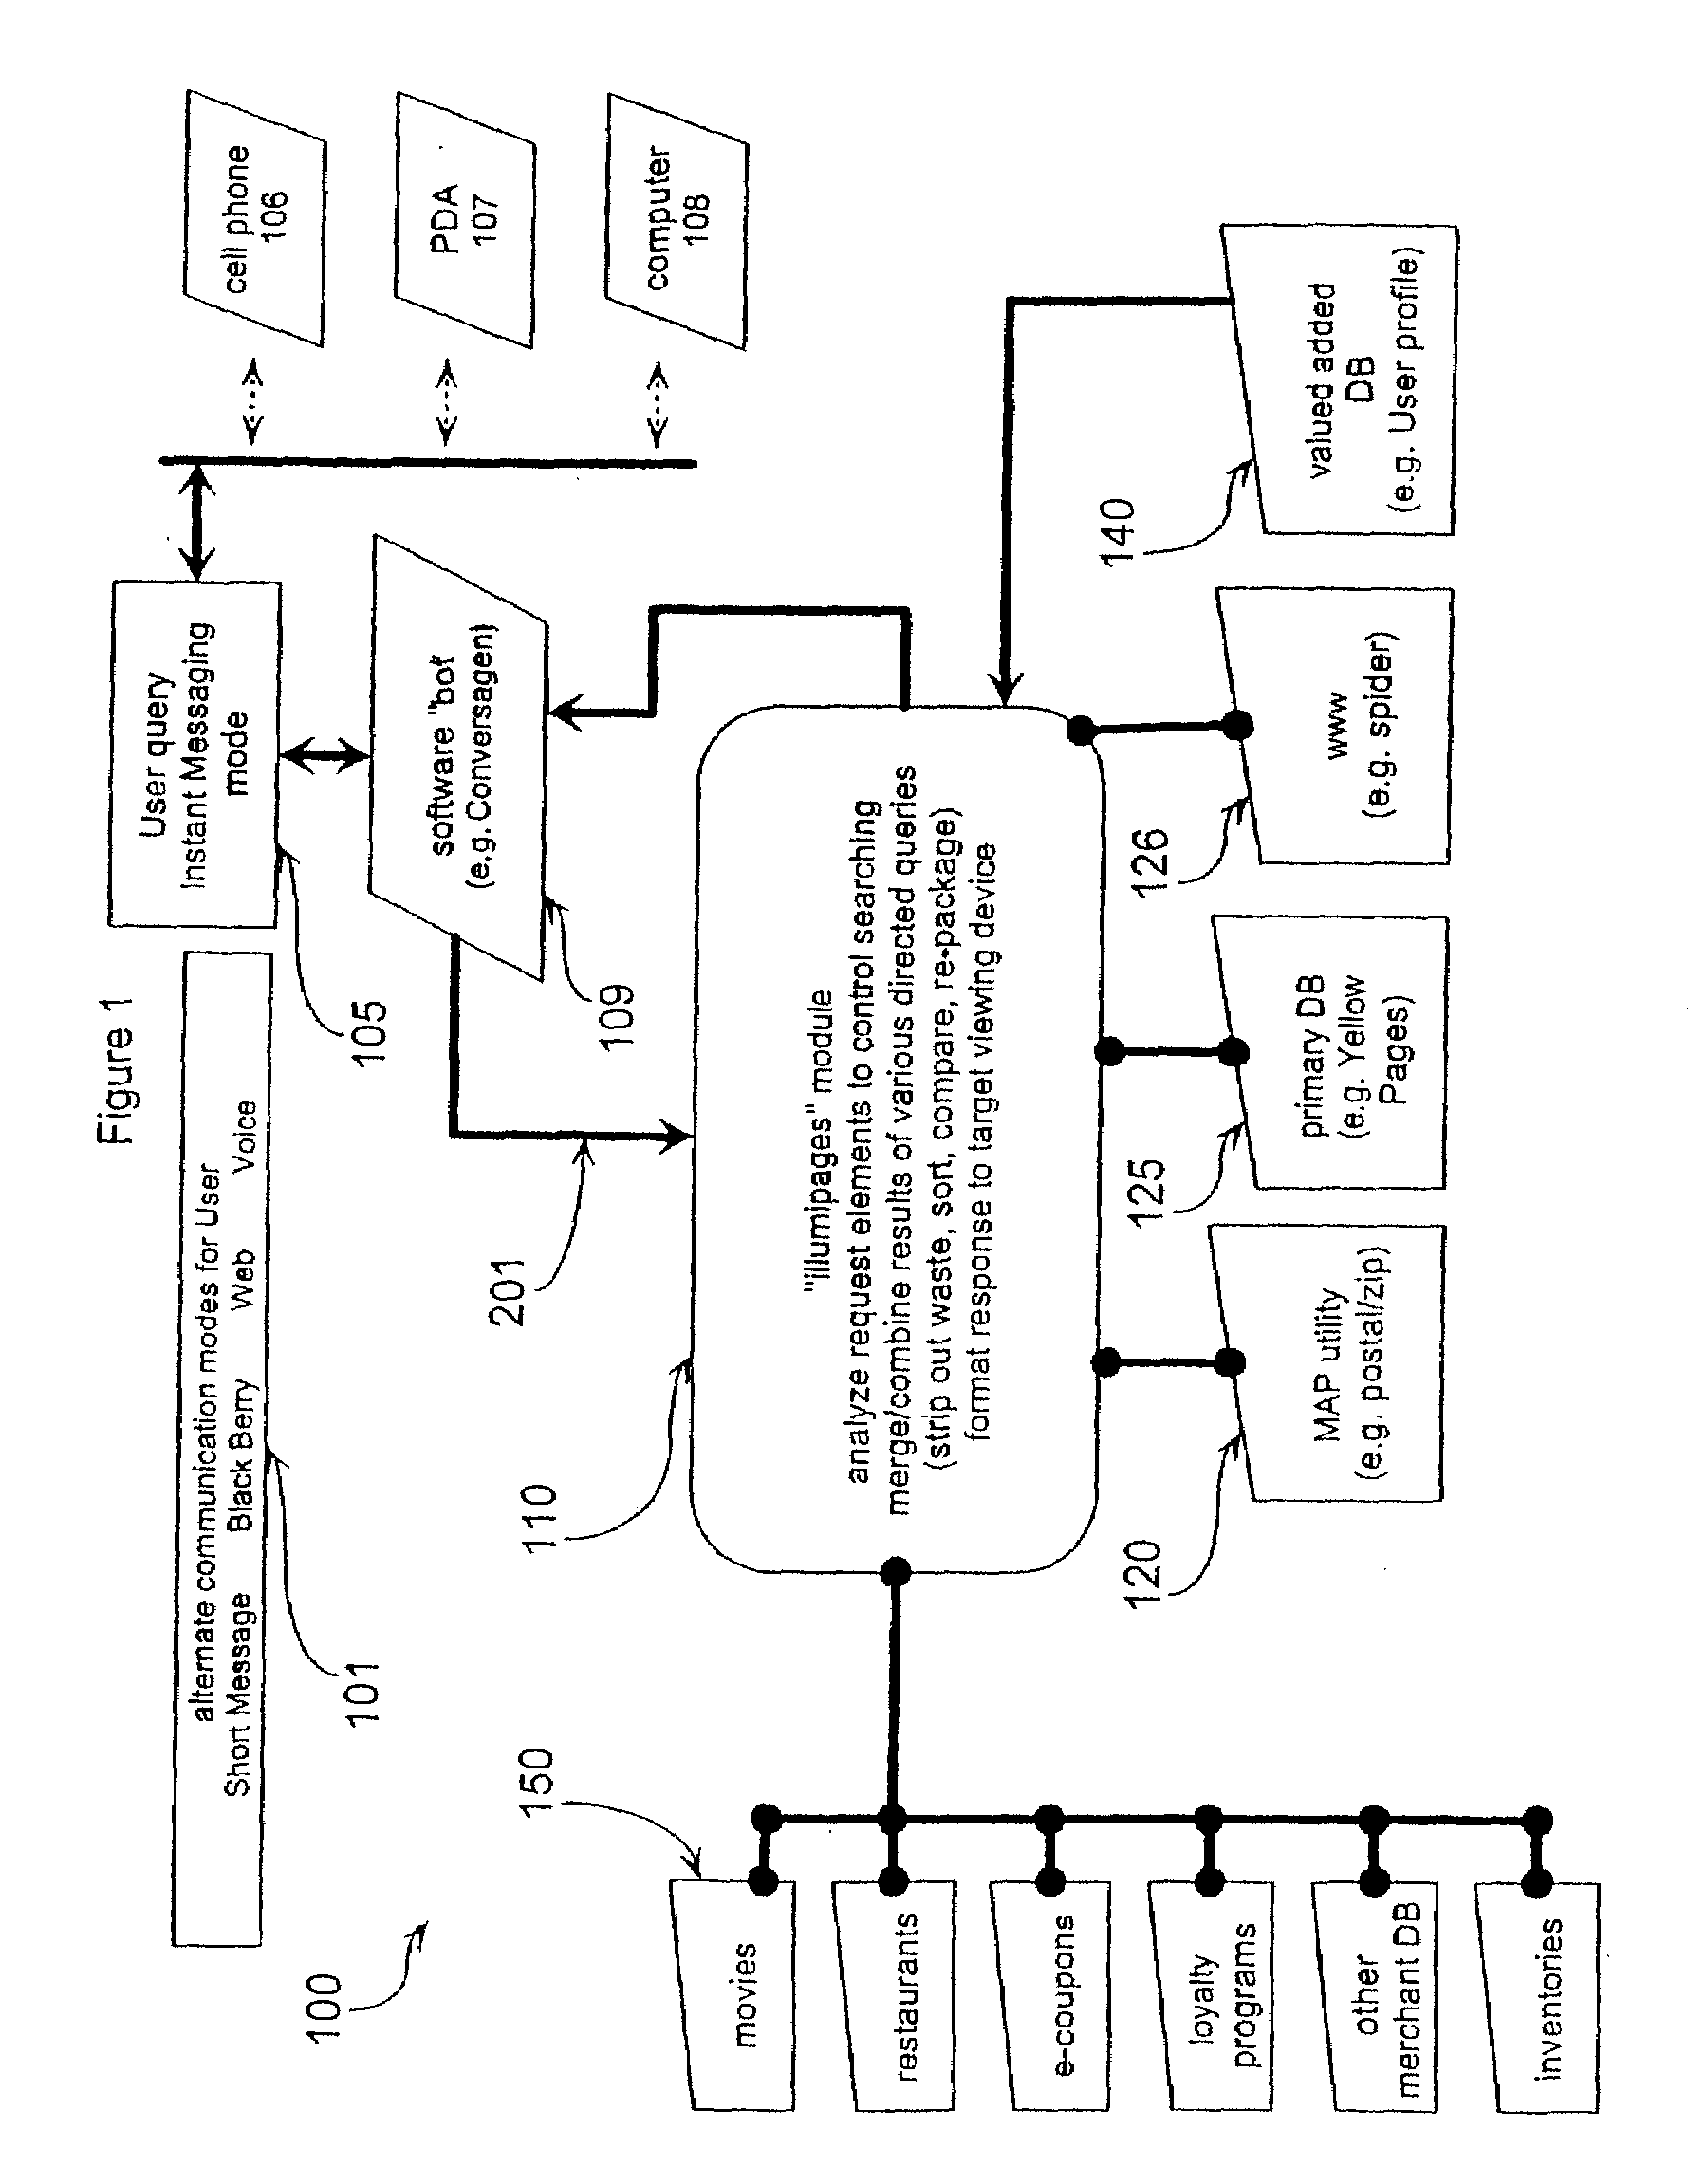 Multi-Mode Location Based E-Directory Service Enabling Method, System, and Apparatus